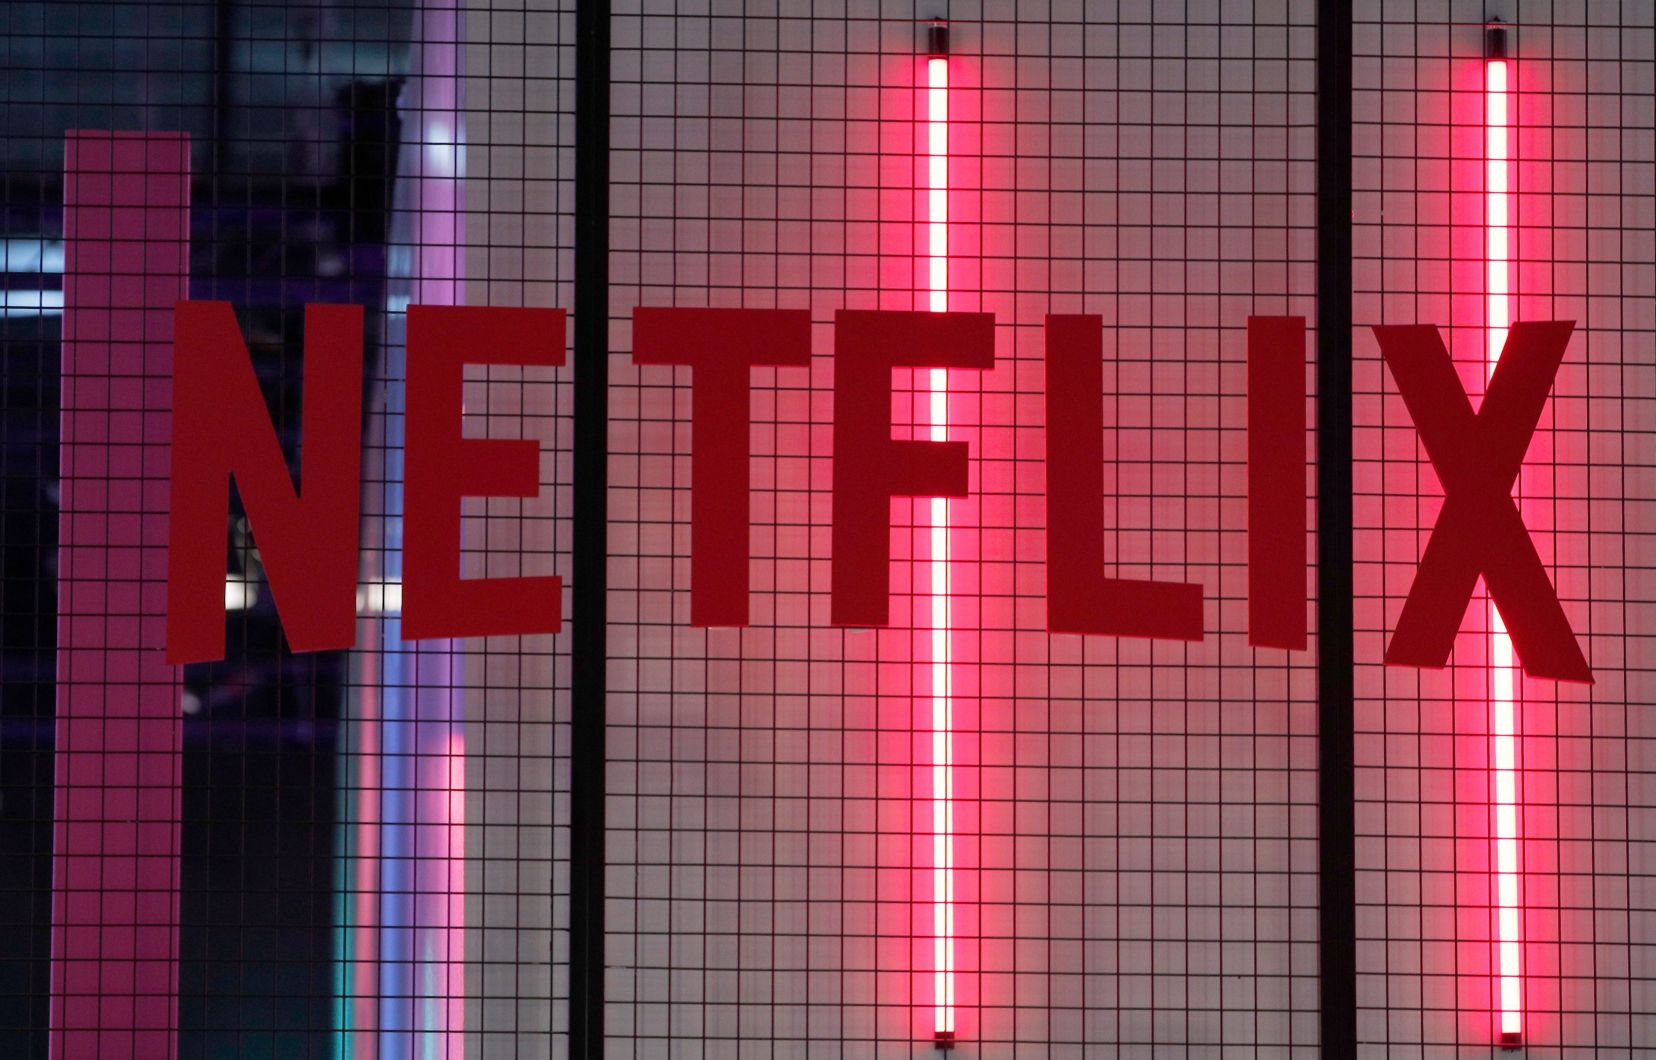 Broadcasting: Netflix chooses to base its Canadian headquarters in Toronto

